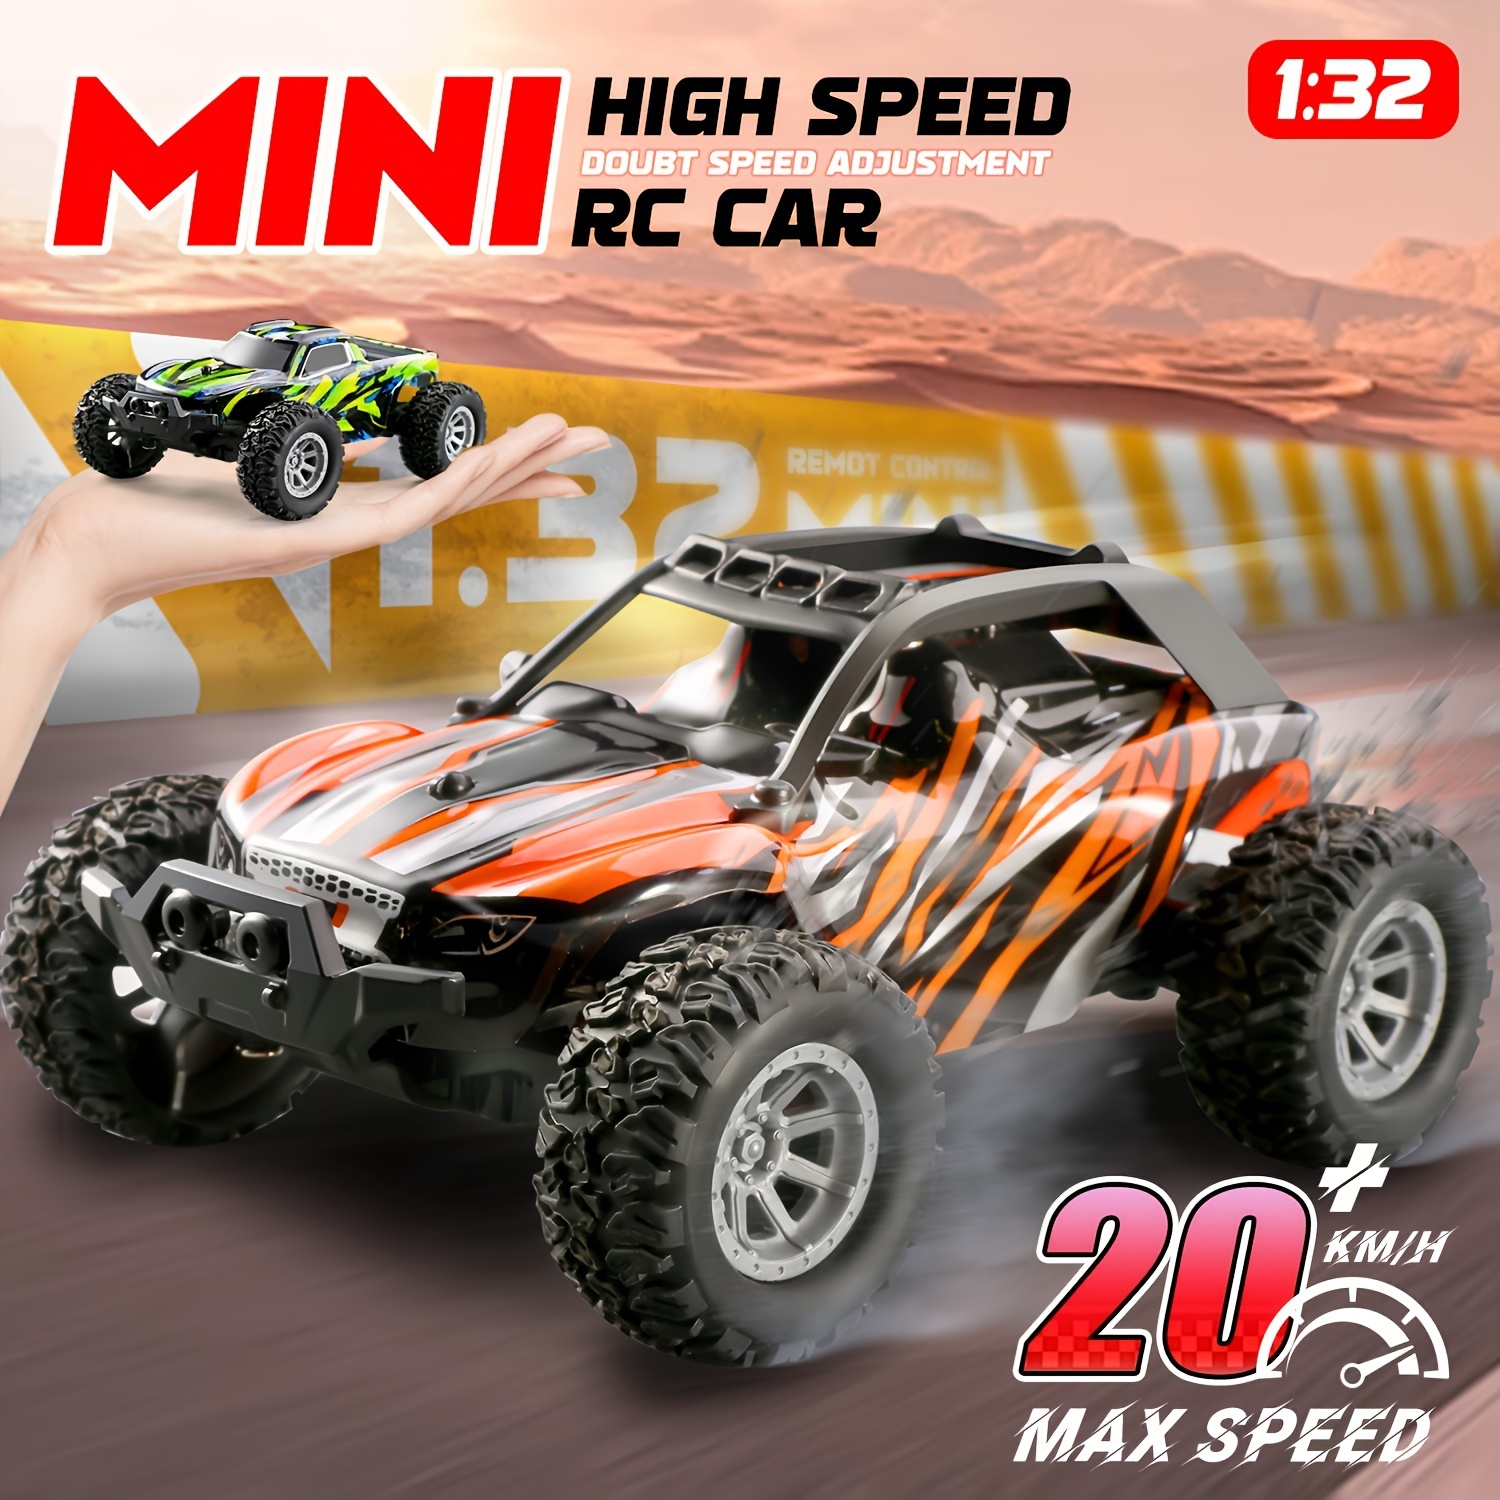 

1:32 Scale Remote Control Car, Top Speed 20km/h, 2.4ghz High Speed All Terrain Off-road Electric Toy Car With Led Lights Ideal Gift For Boys And Girls, Christmas Gift!